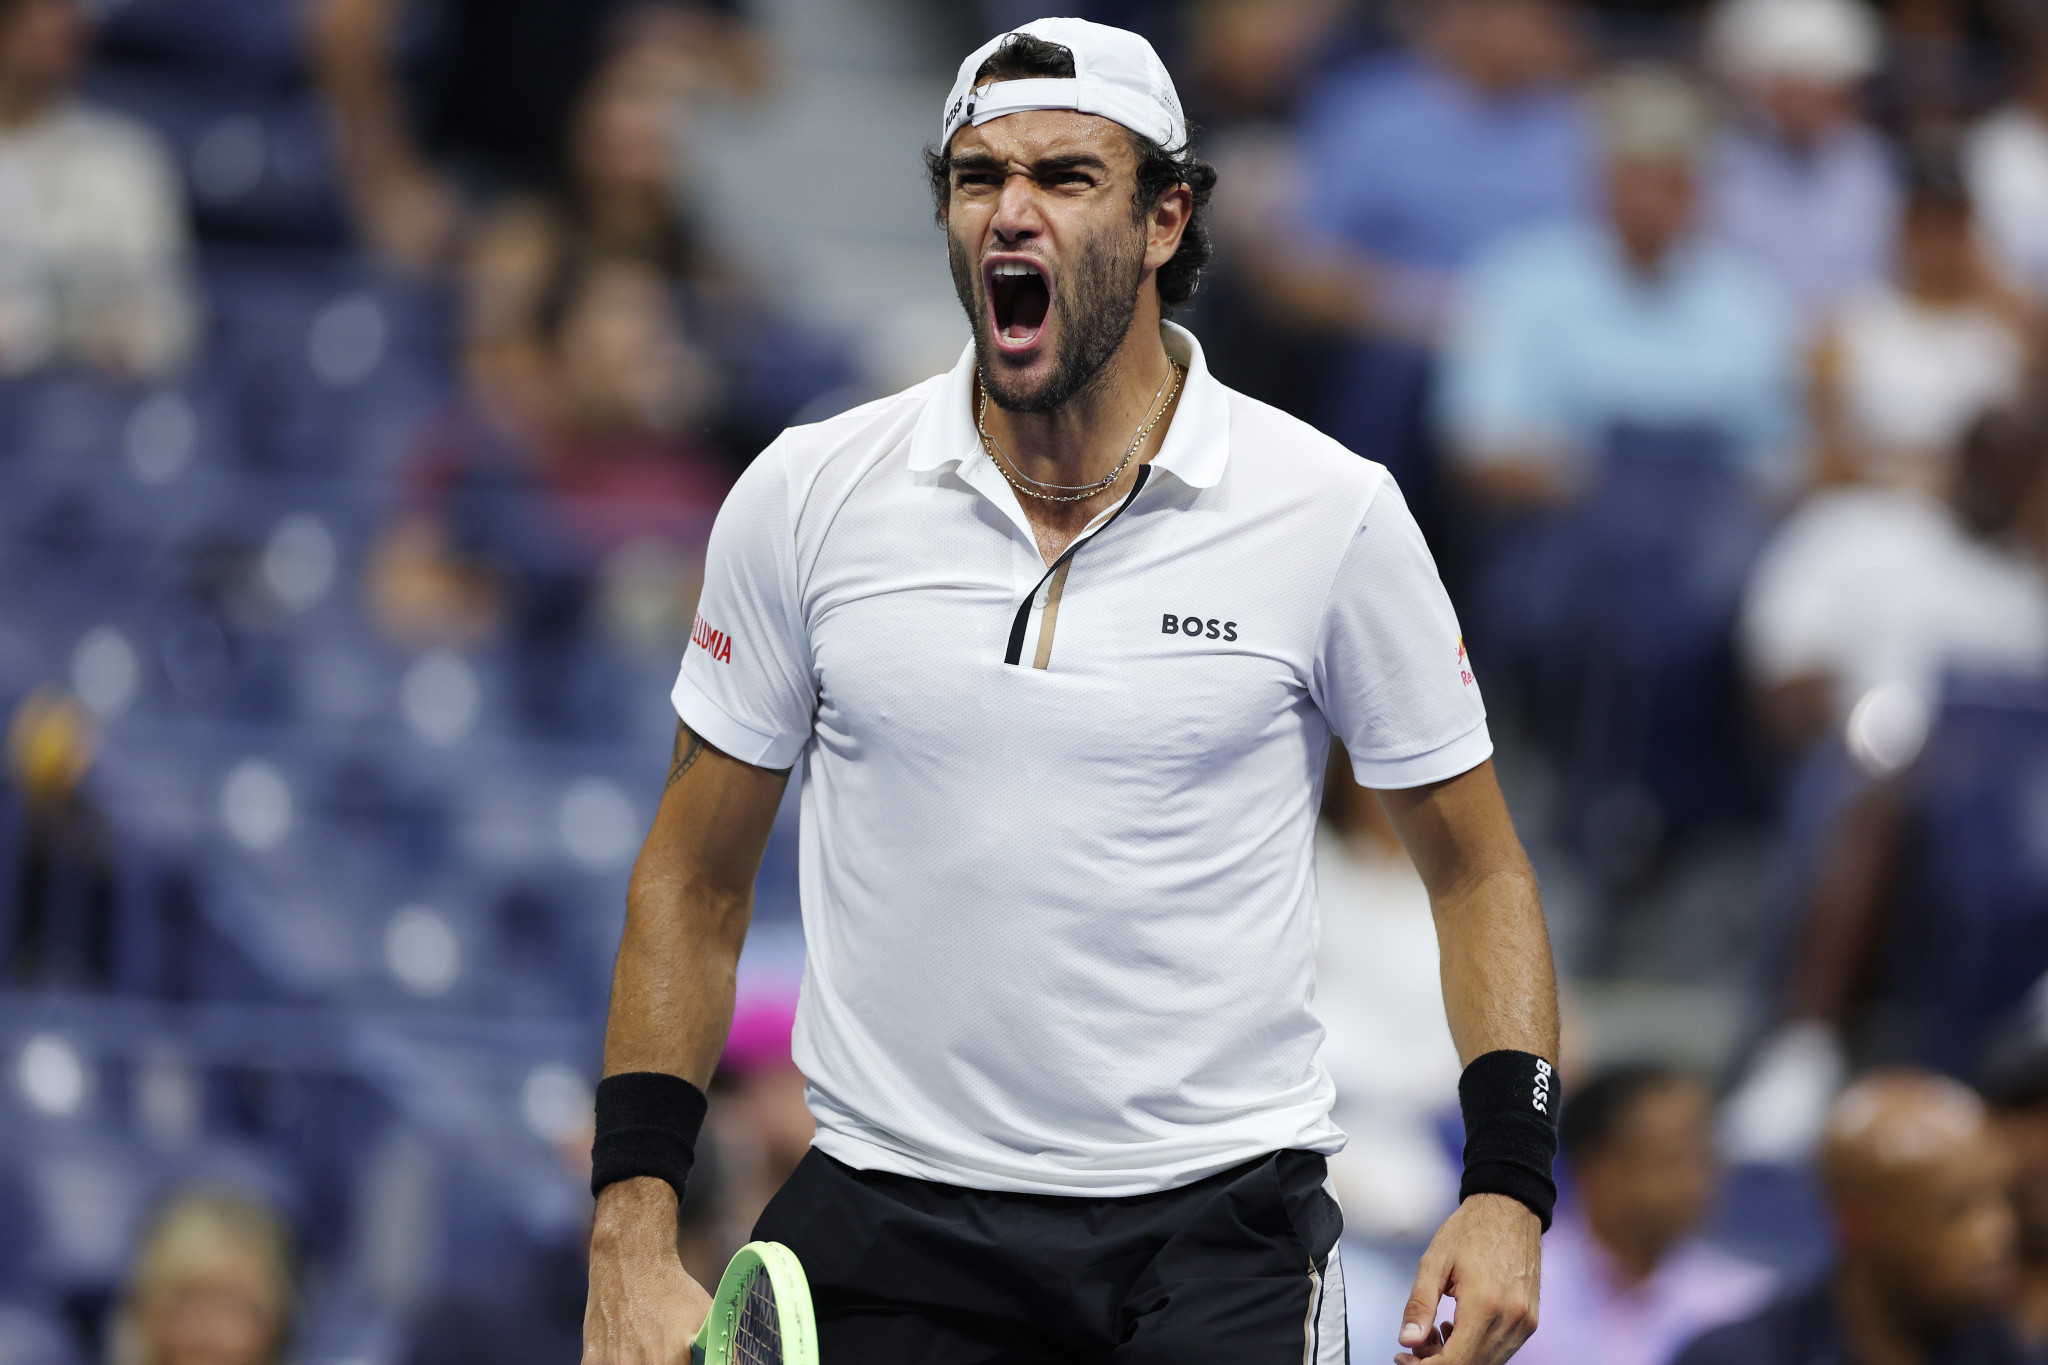 Berrettini battled hard in the third set, forcing Ruud to a tie-break but could not prevail ©Getty Images